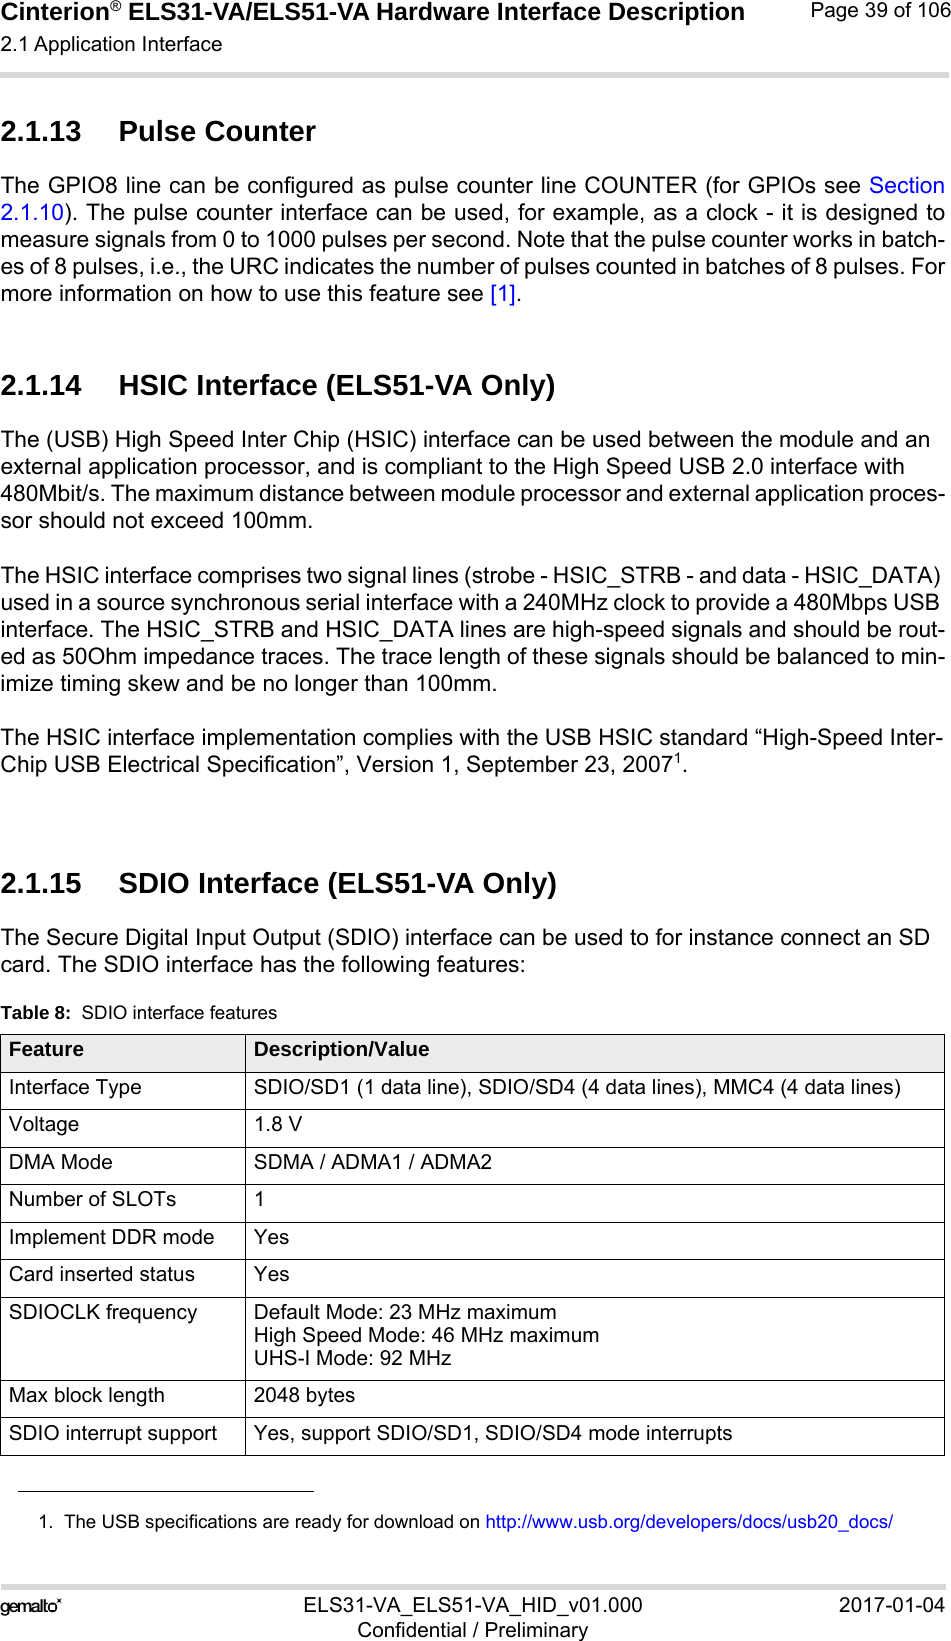 Cinterion® ELS31-VA/ELS51-VA Hardware Interface Description2.1 Application Interface56ELS31-VA_ELS51-VA_HID_v01.000 2017-01-04Confidential / PreliminaryPage 39 of 1062.1.13 Pulse CounterThe GPIO8 line can be configured as pulse counter line COUNTER (for GPIOs see Section2.1.10). The pulse counter interface can be used, for example, as a clock - it is designed tomeasure signals from 0 to 1000 pulses per second. Note that the pulse counter works in batch-es of 8 pulses, i.e., the URC indicates the number of pulses counted in batches of 8 pulses. Formore information on how to use this feature see [1].2.1.14 HSIC Interface (ELS51-VA Only)The (USB) High Speed Inter Chip (HSIC) interface can be used between the module and an external application processor, and is compliant to the High Speed USB 2.0 interface with 480Mbit/s. The maximum distance between module processor and external application proces-sor should not exceed 100mm.The HSIC interface comprises two signal lines (strobe - HSIC_STRB - and data - HSIC_DATA) used in a source synchronous serial interface with a 240MHz clock to provide a 480Mbps USB interface. The HSIC_STRB and HSIC_DATA lines are high-speed signals and should be rout-ed as 50Ohm impedance traces. The trace length of these signals should be balanced to min-imize timing skew and be no longer than 100mm.The HSIC interface implementation complies with the USB HSIC standard “High-Speed Inter-Chip USB Electrical Specification”, Version 1, September 23, 20071.2.1.15 SDIO Interface (ELS51-VA Only)The Secure Digital Input Output (SDIO) interface can be used to for instance connect an SD card. The SDIO interface has the following features:1.  The USB specifications are ready for download on http://www.usb.org/developers/docs/usb20_docs/Table 8:  SDIO interface featuresFeature Description/ValueInterface Type SDIO/SD1 (1 data line), SDIO/SD4 (4 data lines), MMC4 (4 data lines)Voltage 1.8 VDMA Mode SDMA / ADMA1 / ADMA2Number of SLOTs 1Implement DDR mode YesCard inserted status YesSDIOCLK frequency Default Mode: 23 MHz maximumHigh Speed Mode: 46 MHz maximumUHS-I Mode: 92 MHzMax block length 2048 bytesSDIO interrupt support Yes, support SDIO/SD1, SDIO/SD4 mode interrupts